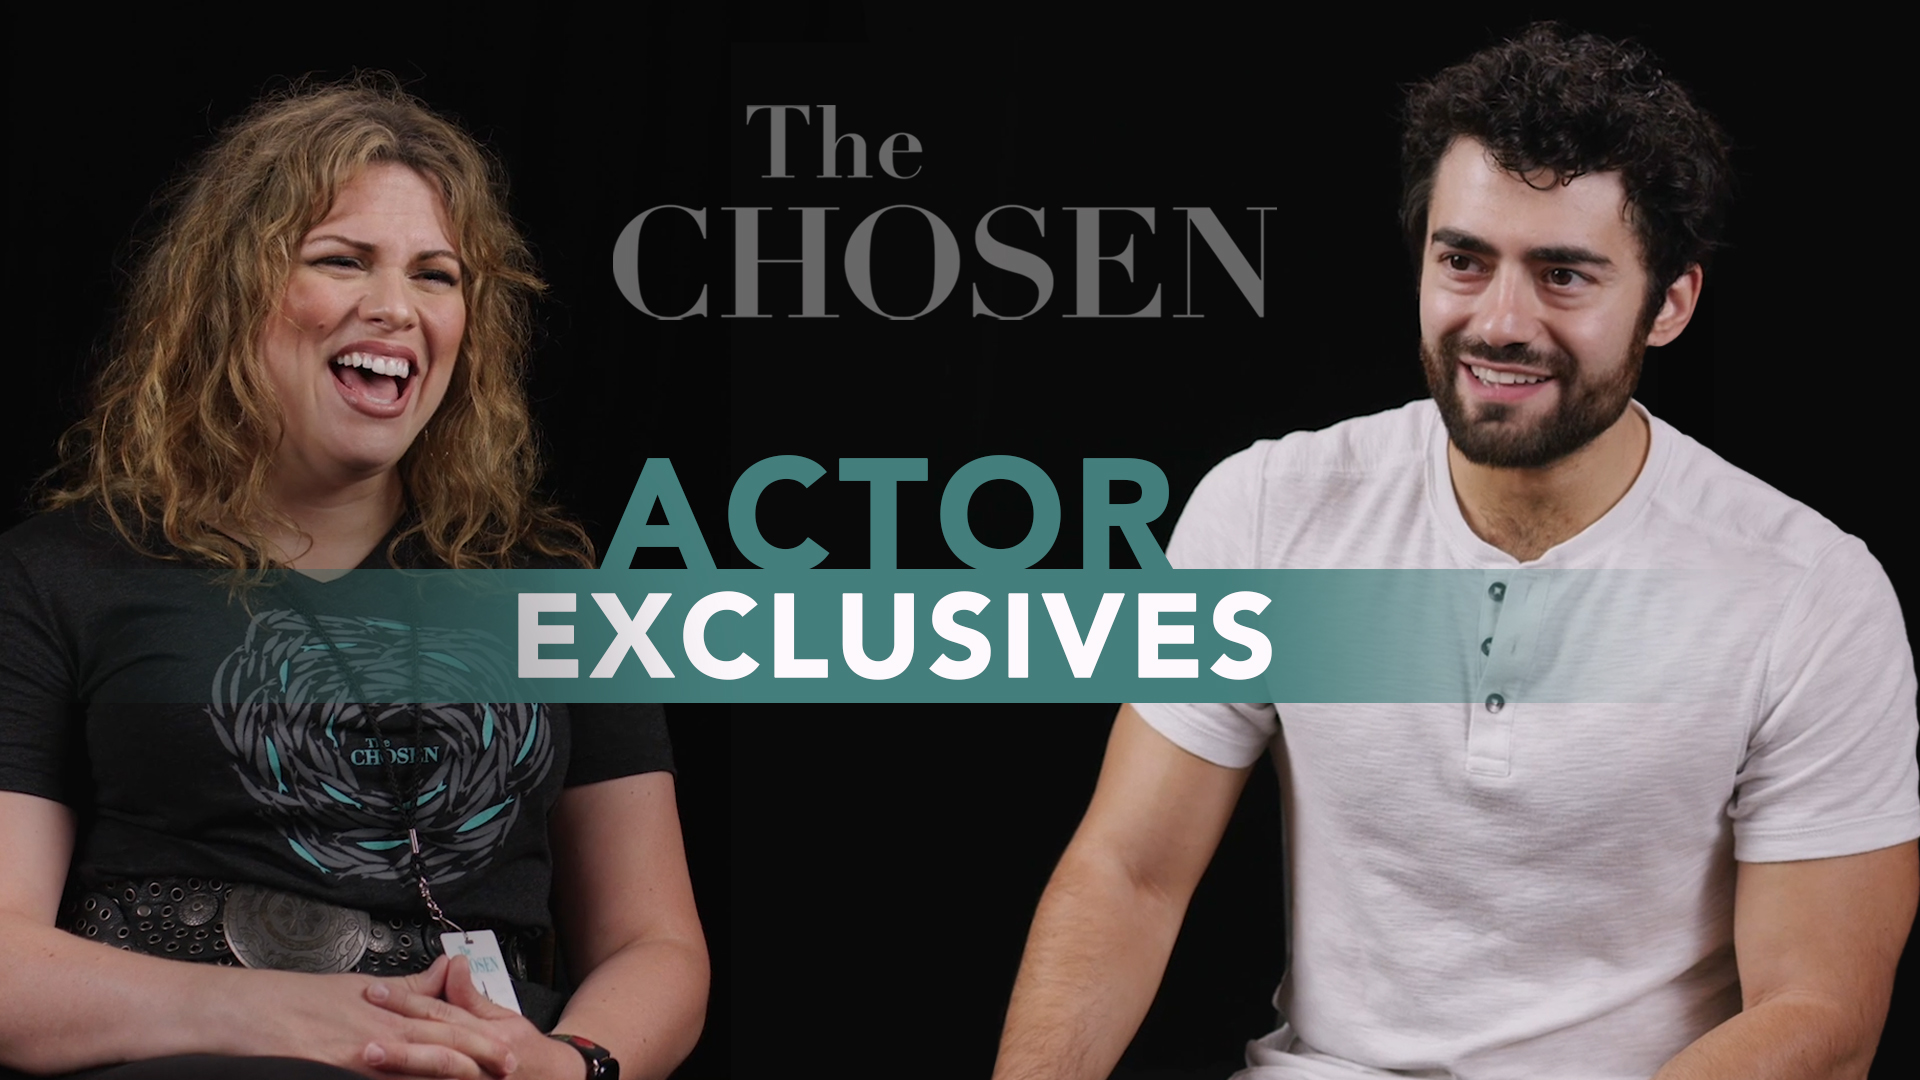 The Chosen Is More Than Just a TV Show to It's Cast - Exclusive Actor Interviews - Rachelle from KSBJ